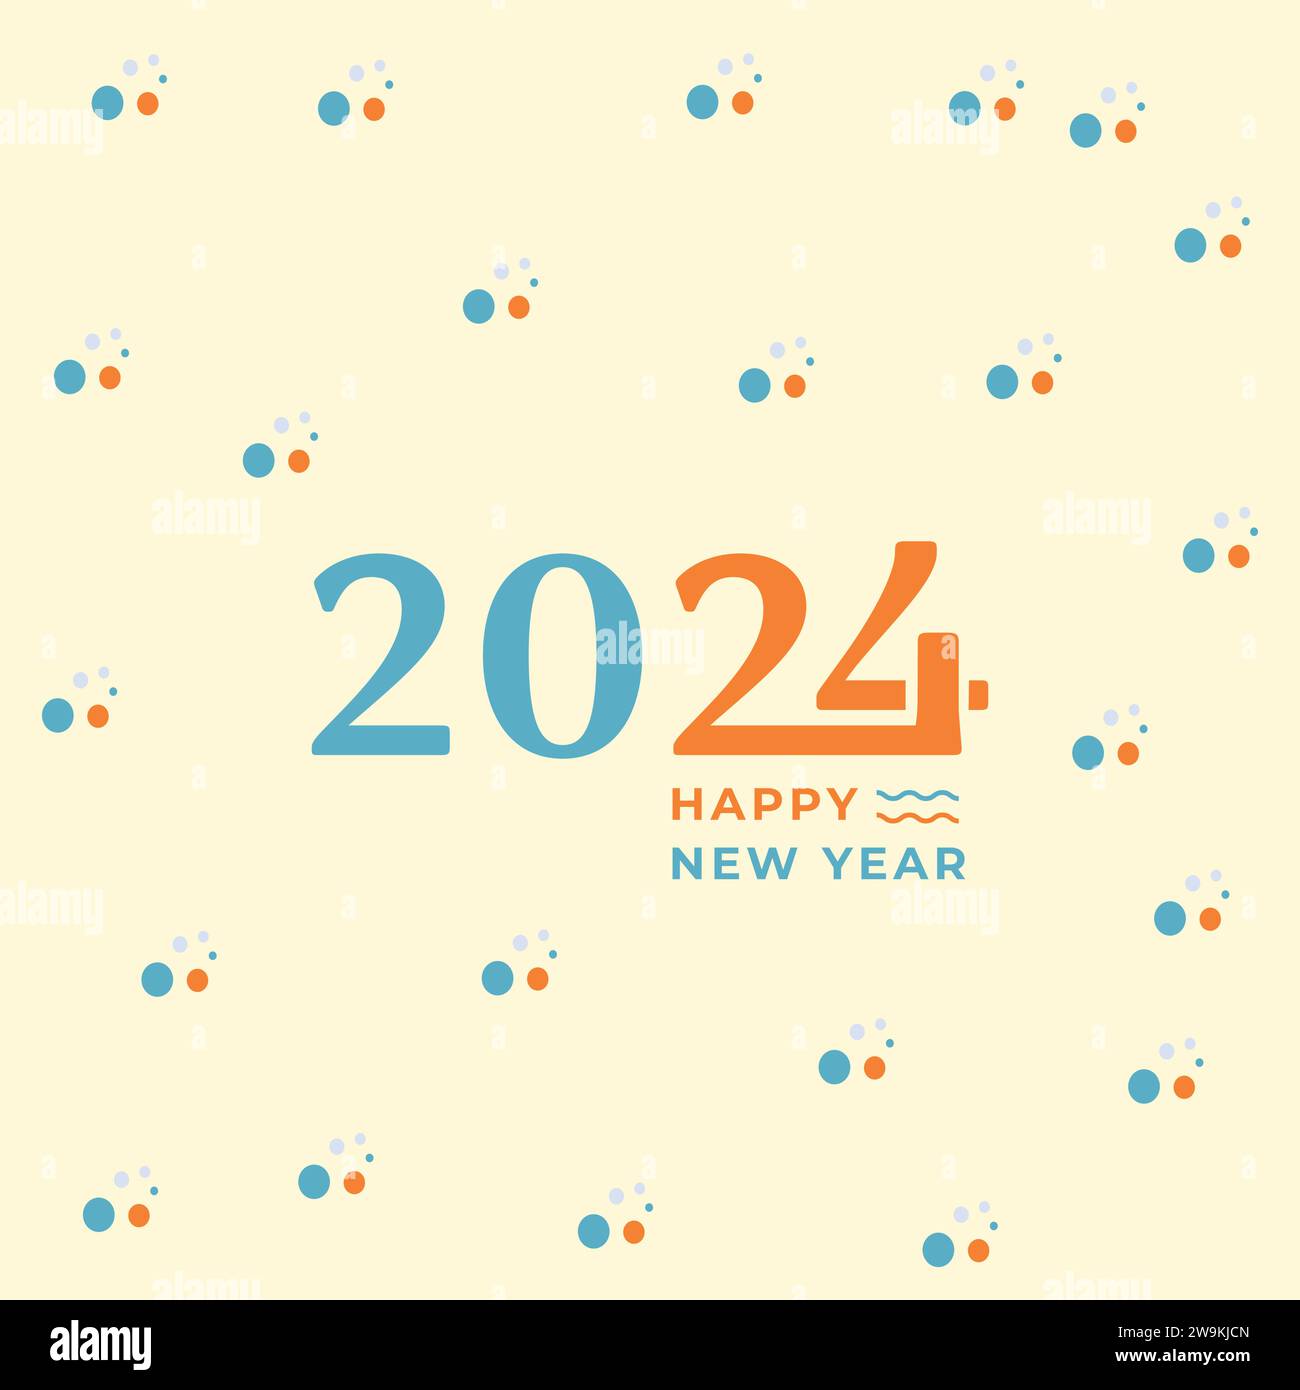 Happy new year 2024, biggest celebrations for 2024 Stock Vector Image